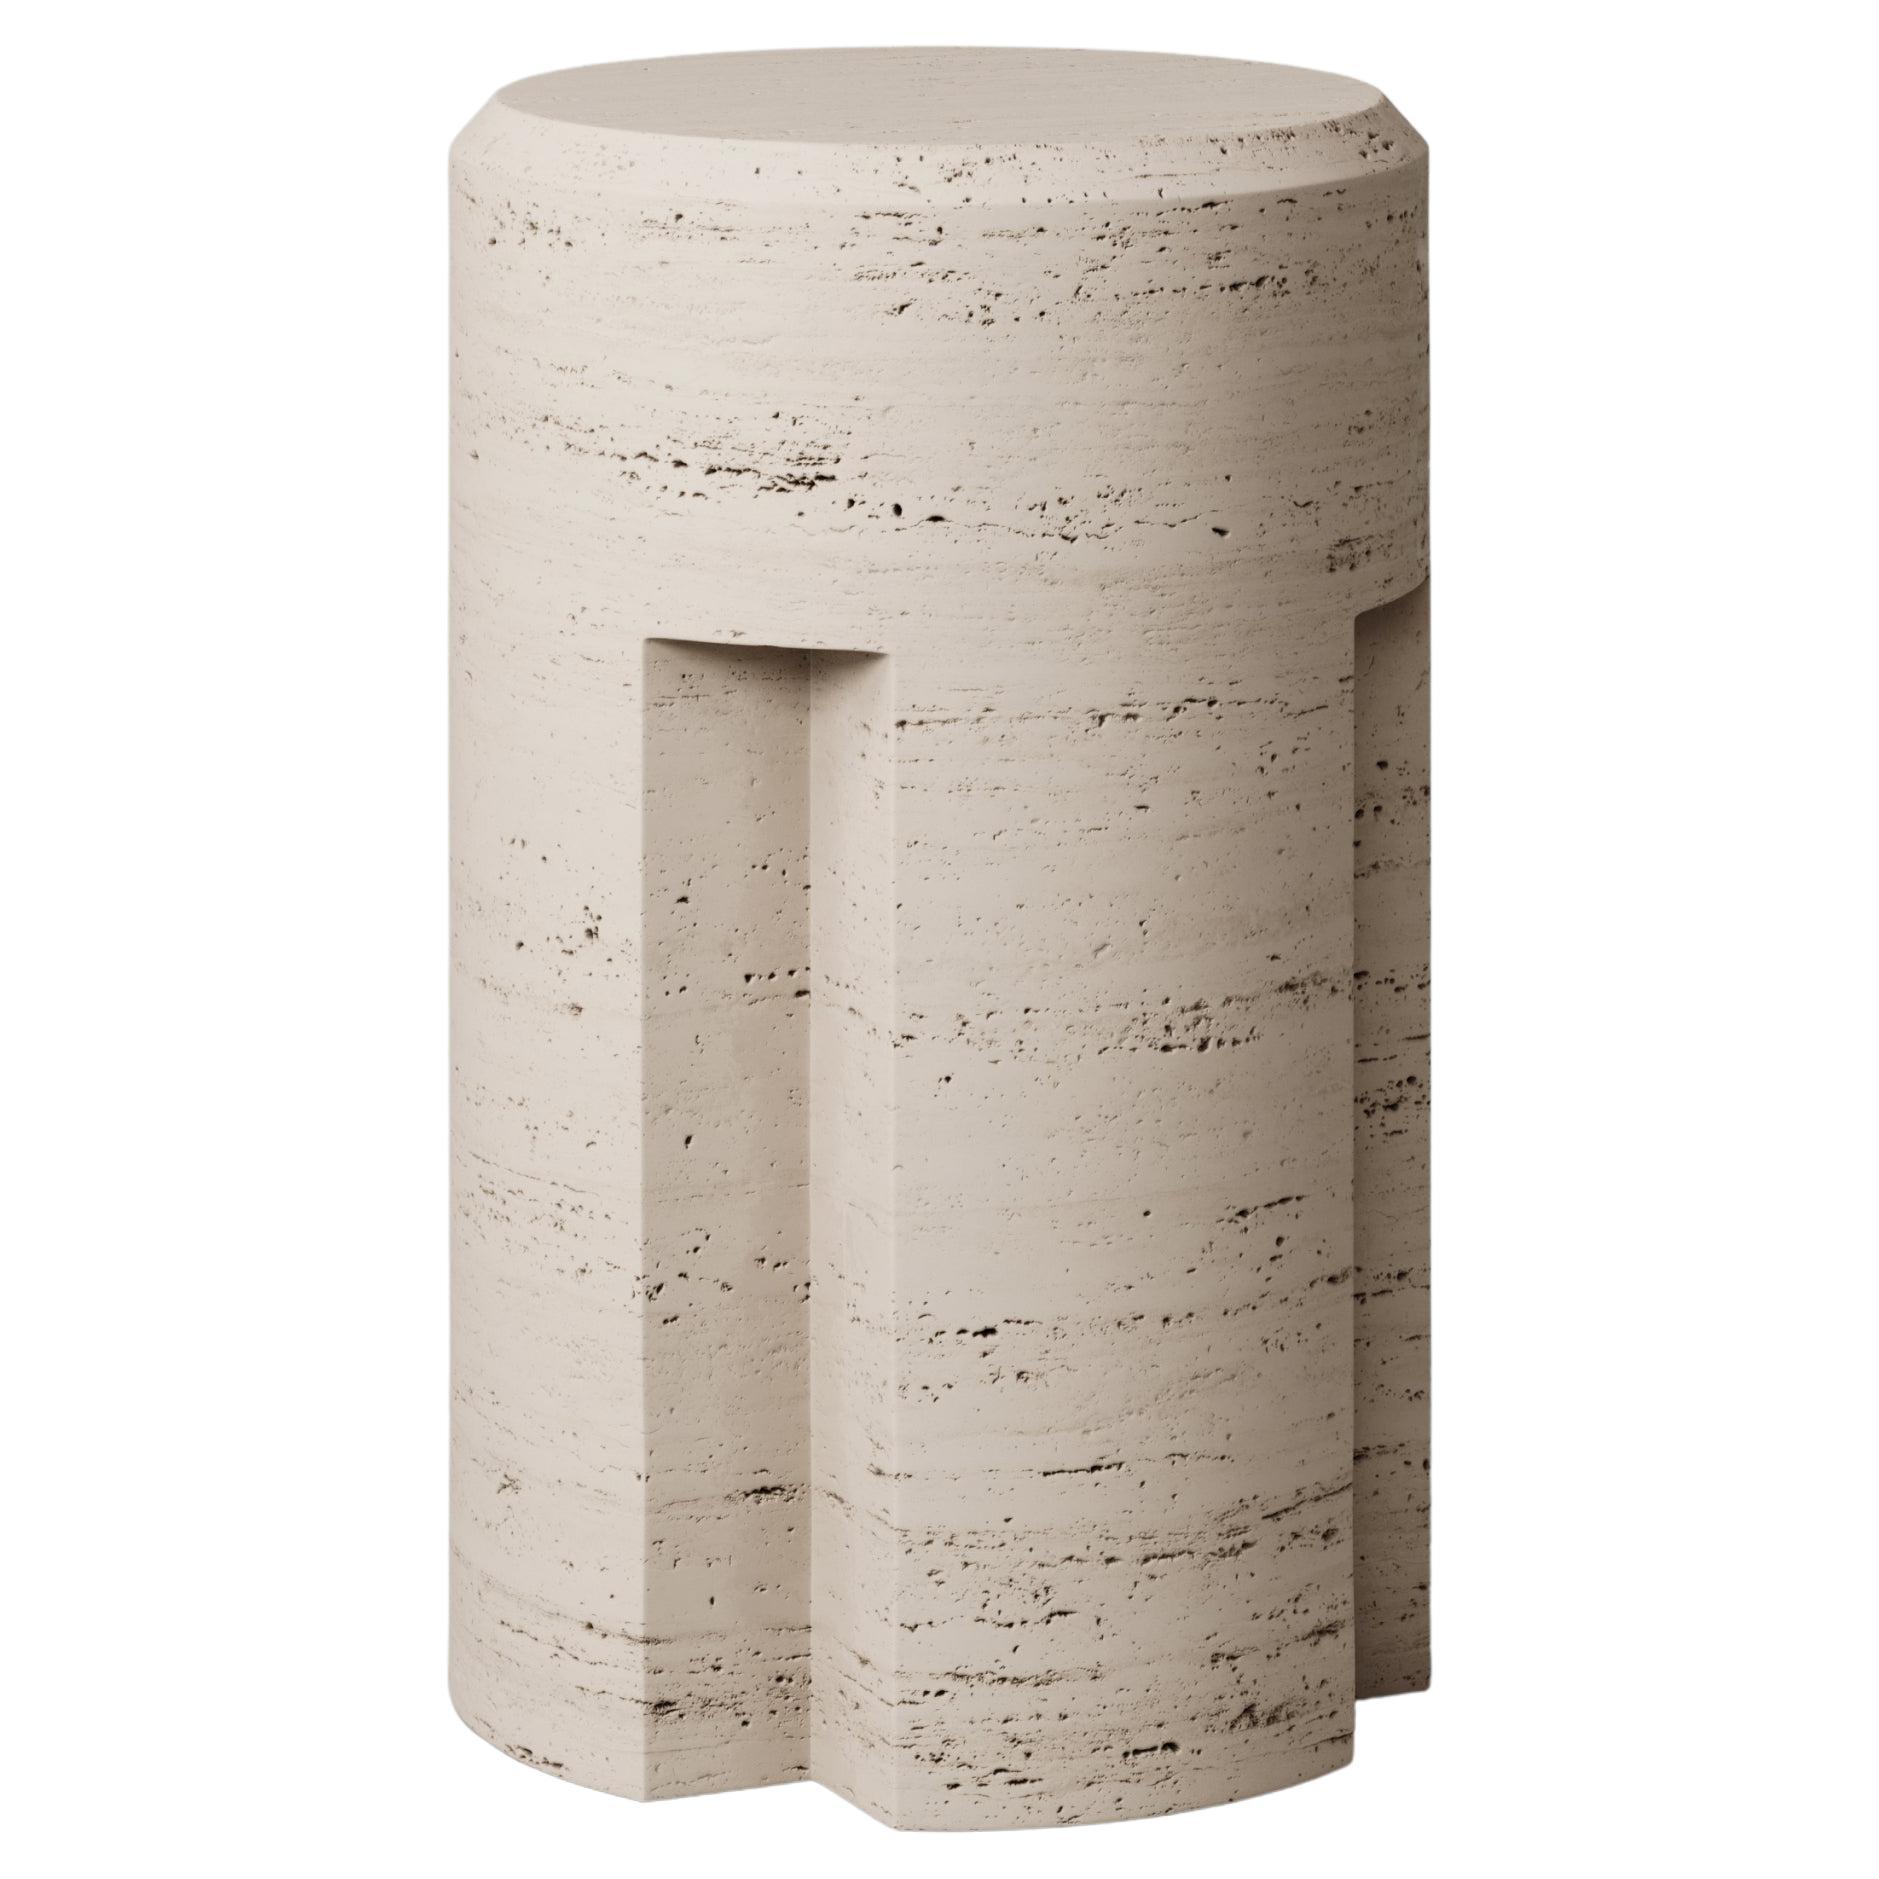 M_003 Counter Stool designed by Studio Le Cann for Monolith Studio, Travertine For Sale